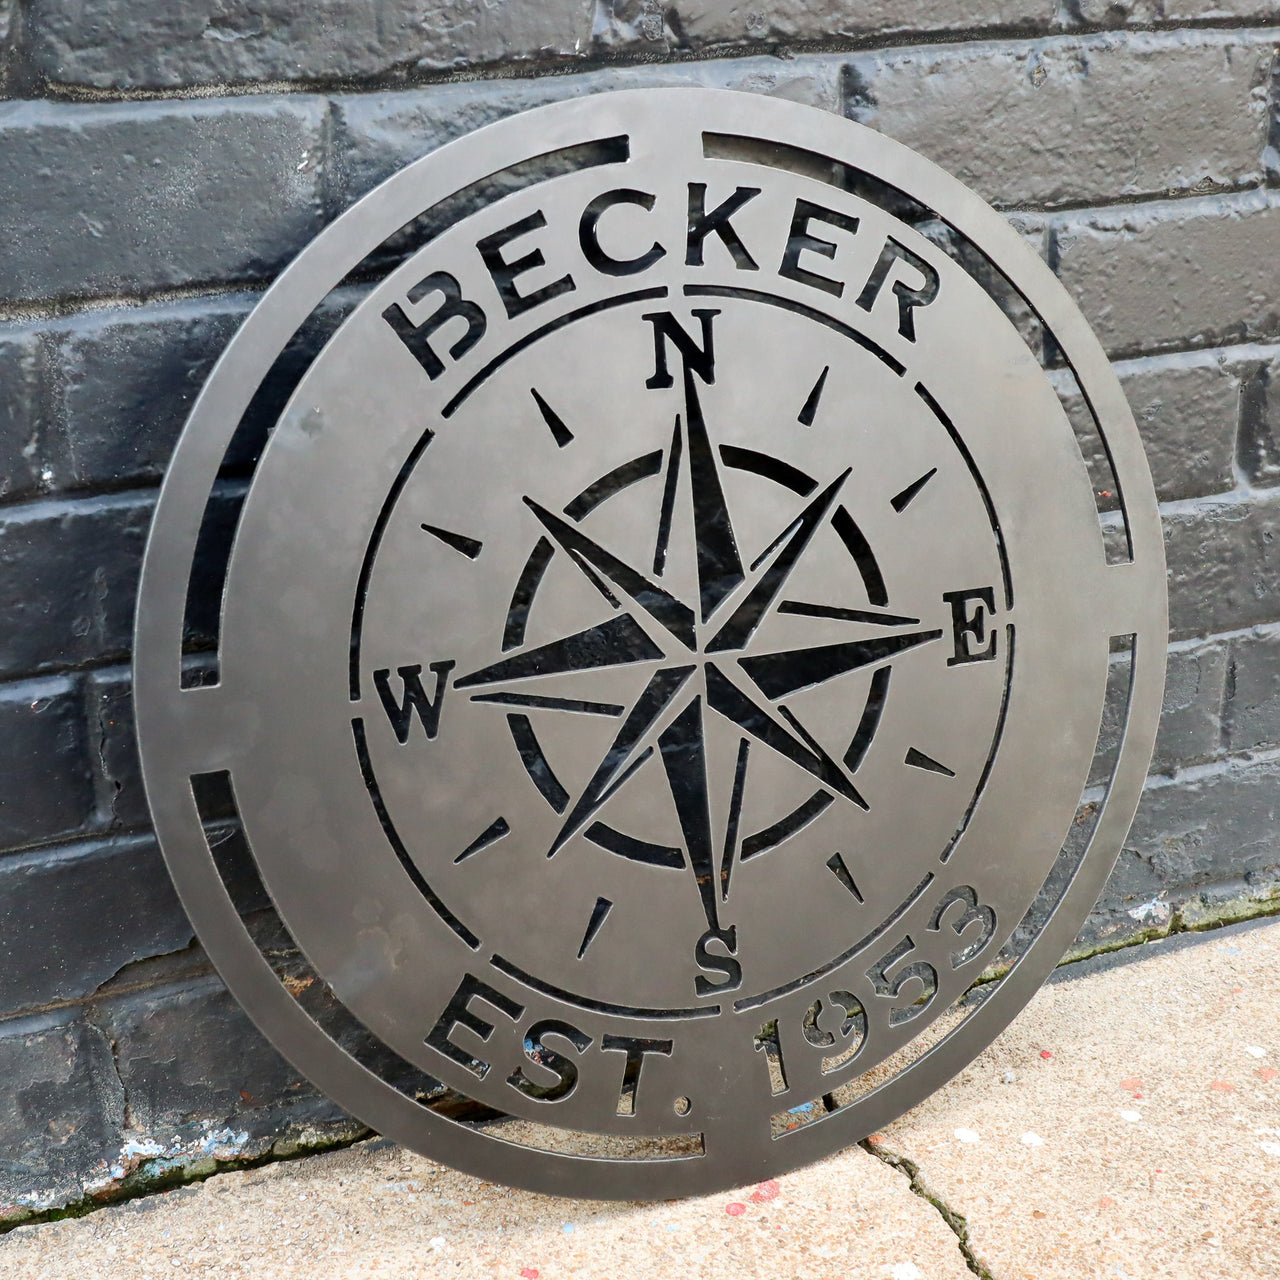 Compass Rose Wedding Gift Sign - Personalized Metal Nautical Wall Art - Established Date Anniversary